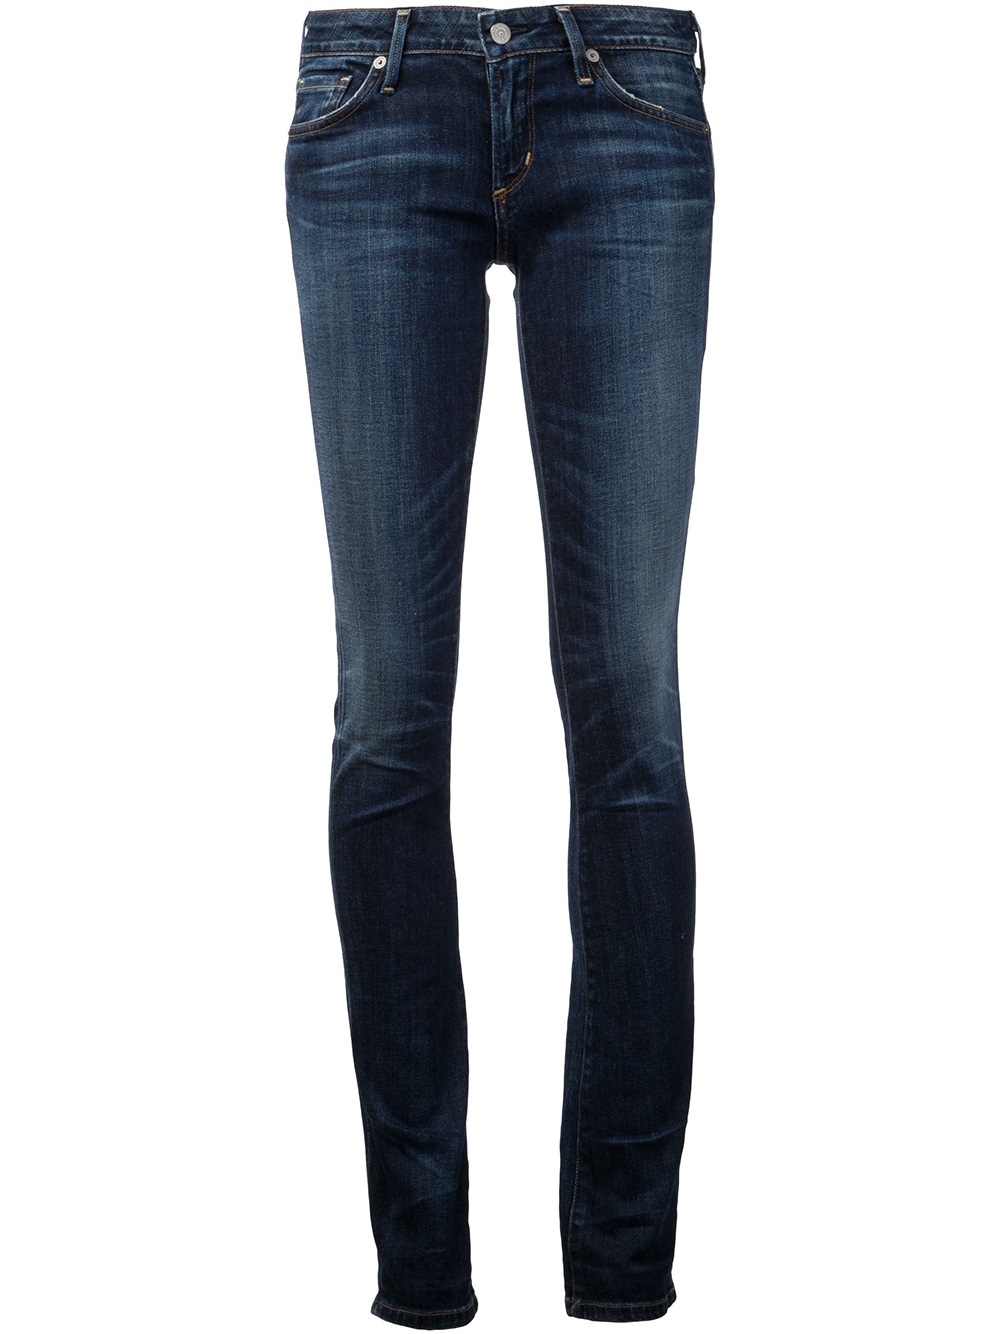 Citizens Of Humanity Jett Low Rise Jeans in Blue | Lyst